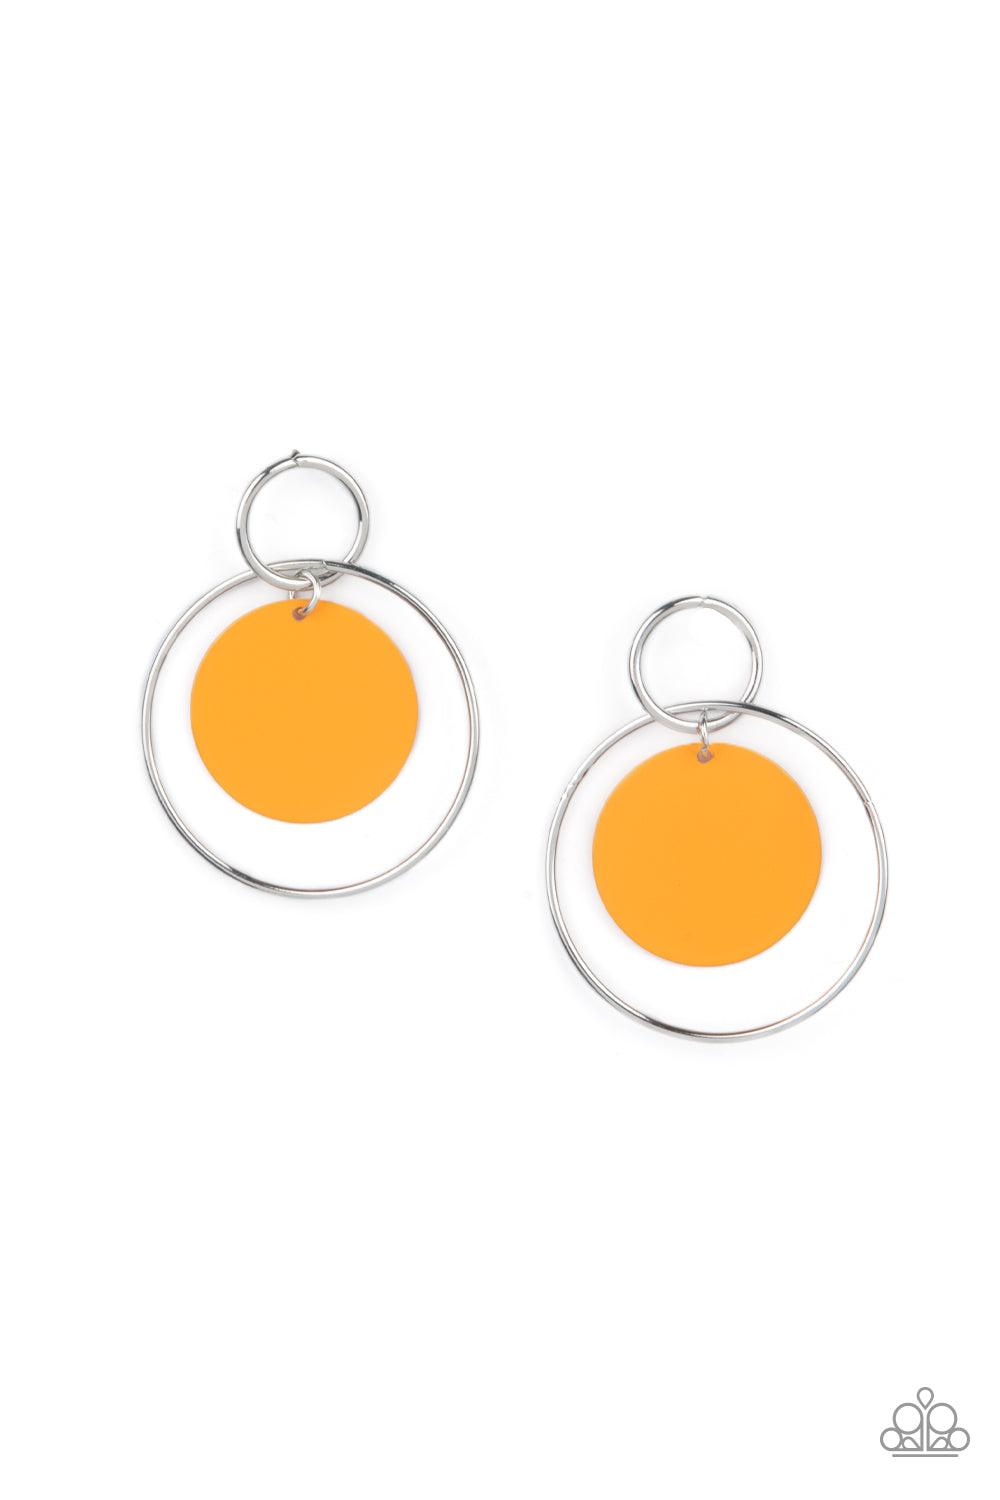 Paparazzi Accessories POP, Look, and Listen - Orange A Marigold disc swings from two interlocking silver hoops, creating a flirtatious pop of color. Earring attaches to a standard post fitting. Sold as one pair of post earrings. Jewelry